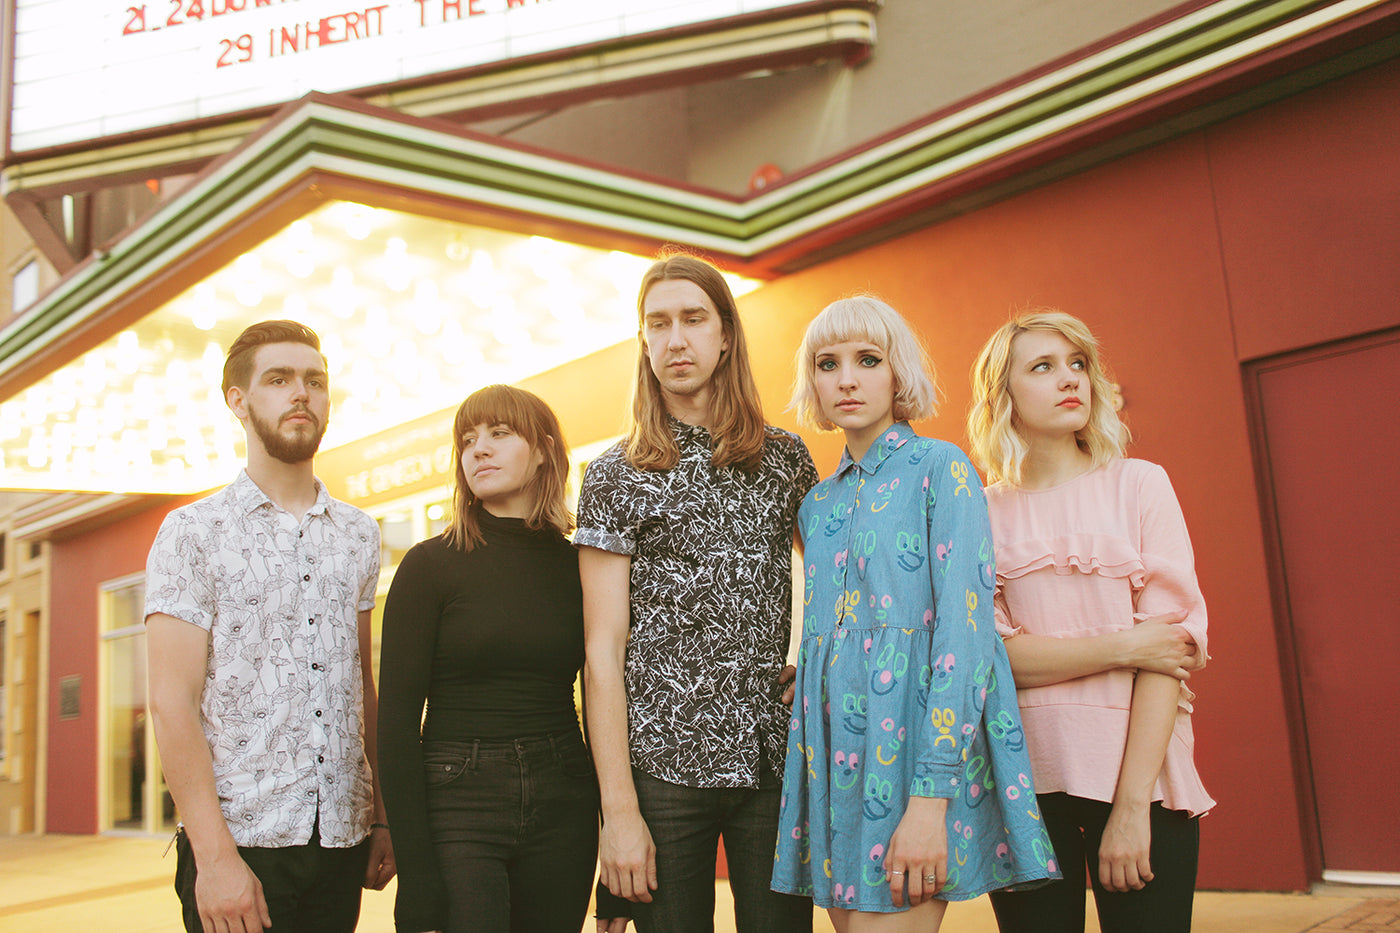 EISLEY RELEASES B-SIDE “I WON’T CRY”